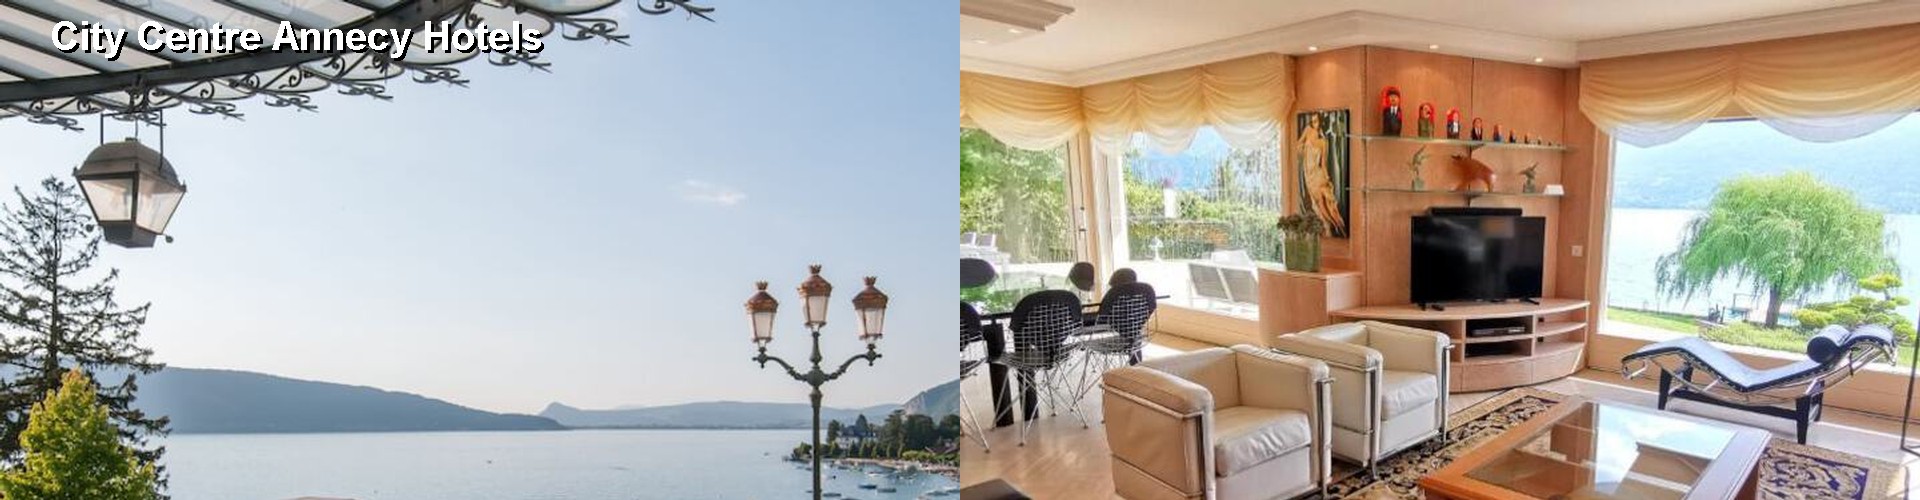 5 Best Hotels near City Centre Annecy